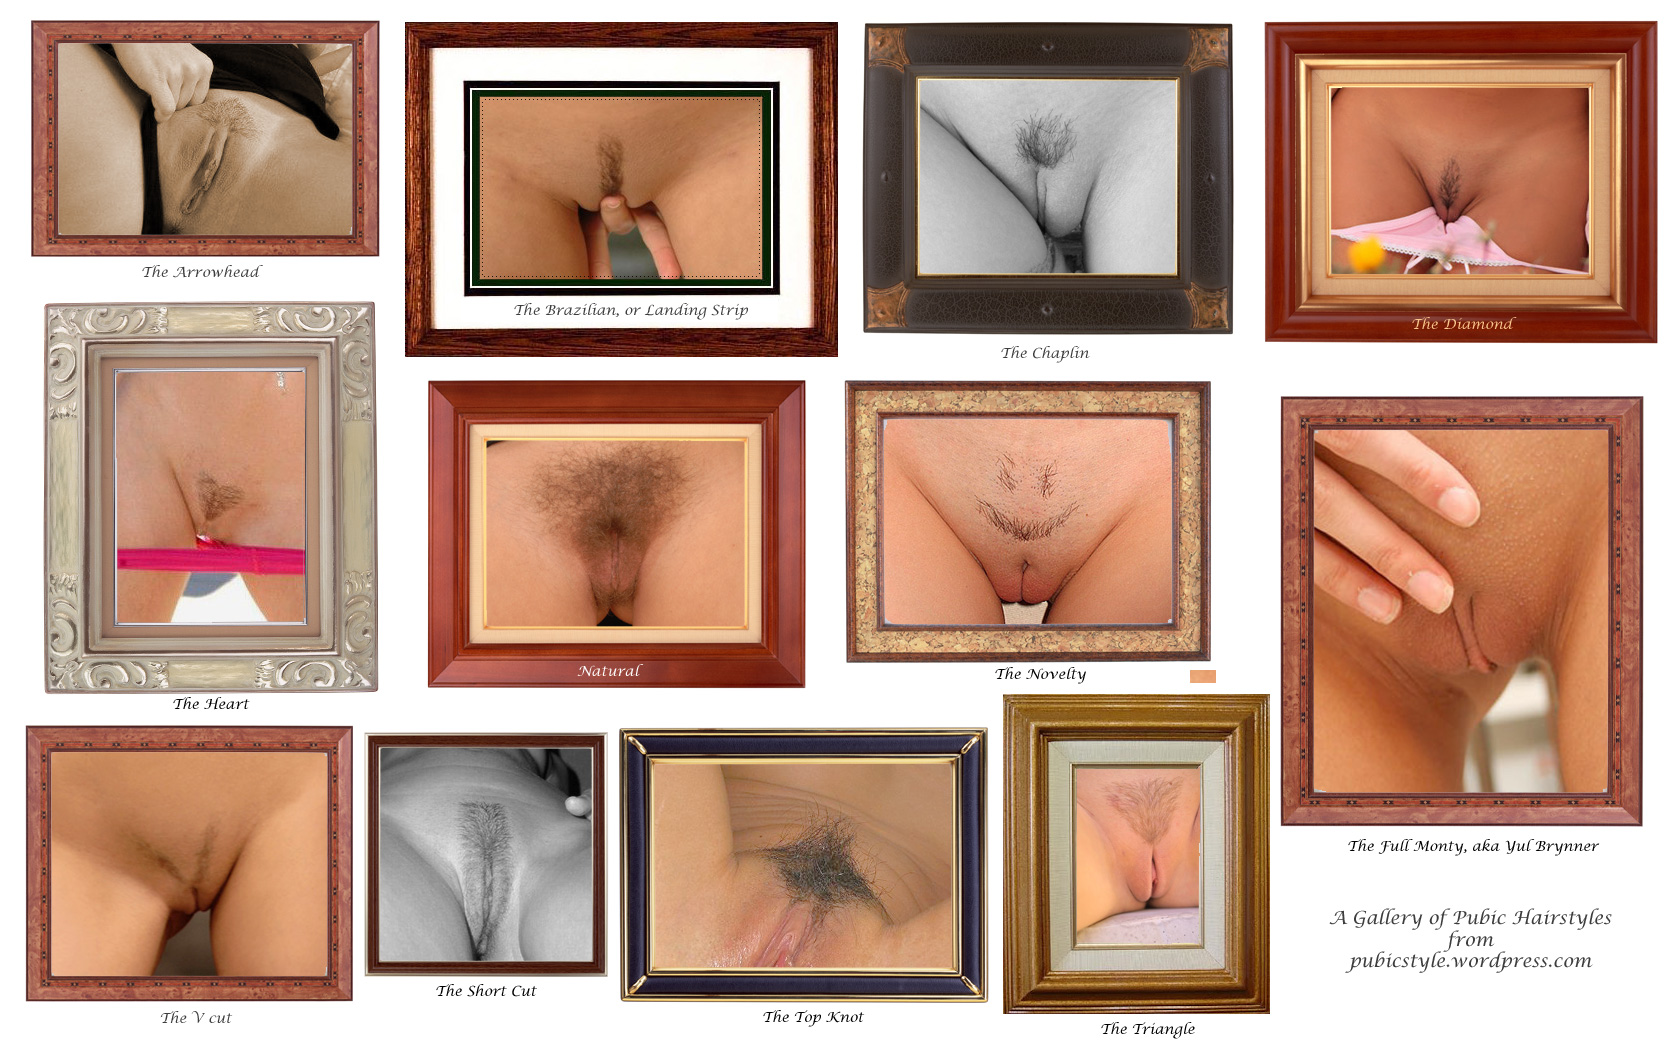 A gallery of pubic hairstyles.